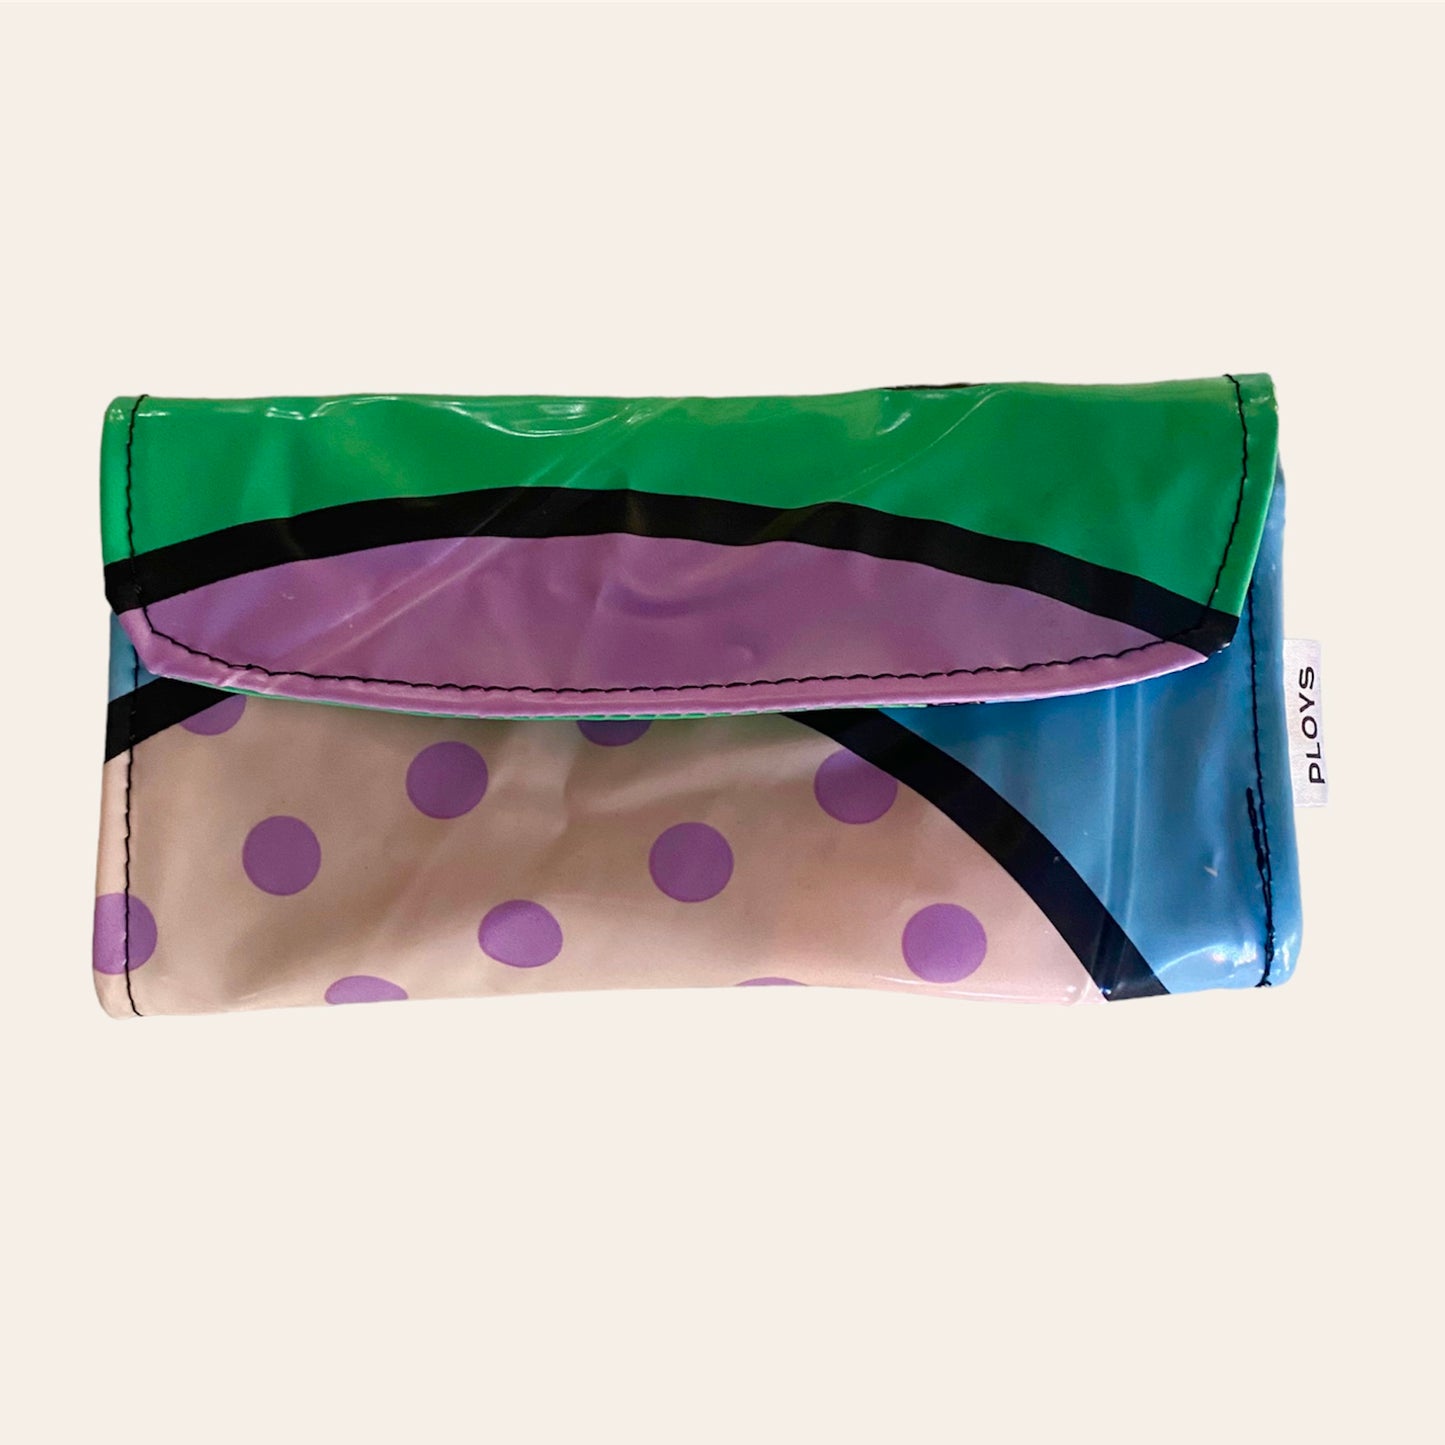 Ladies Wallet - recycled inflatables - variety of colours